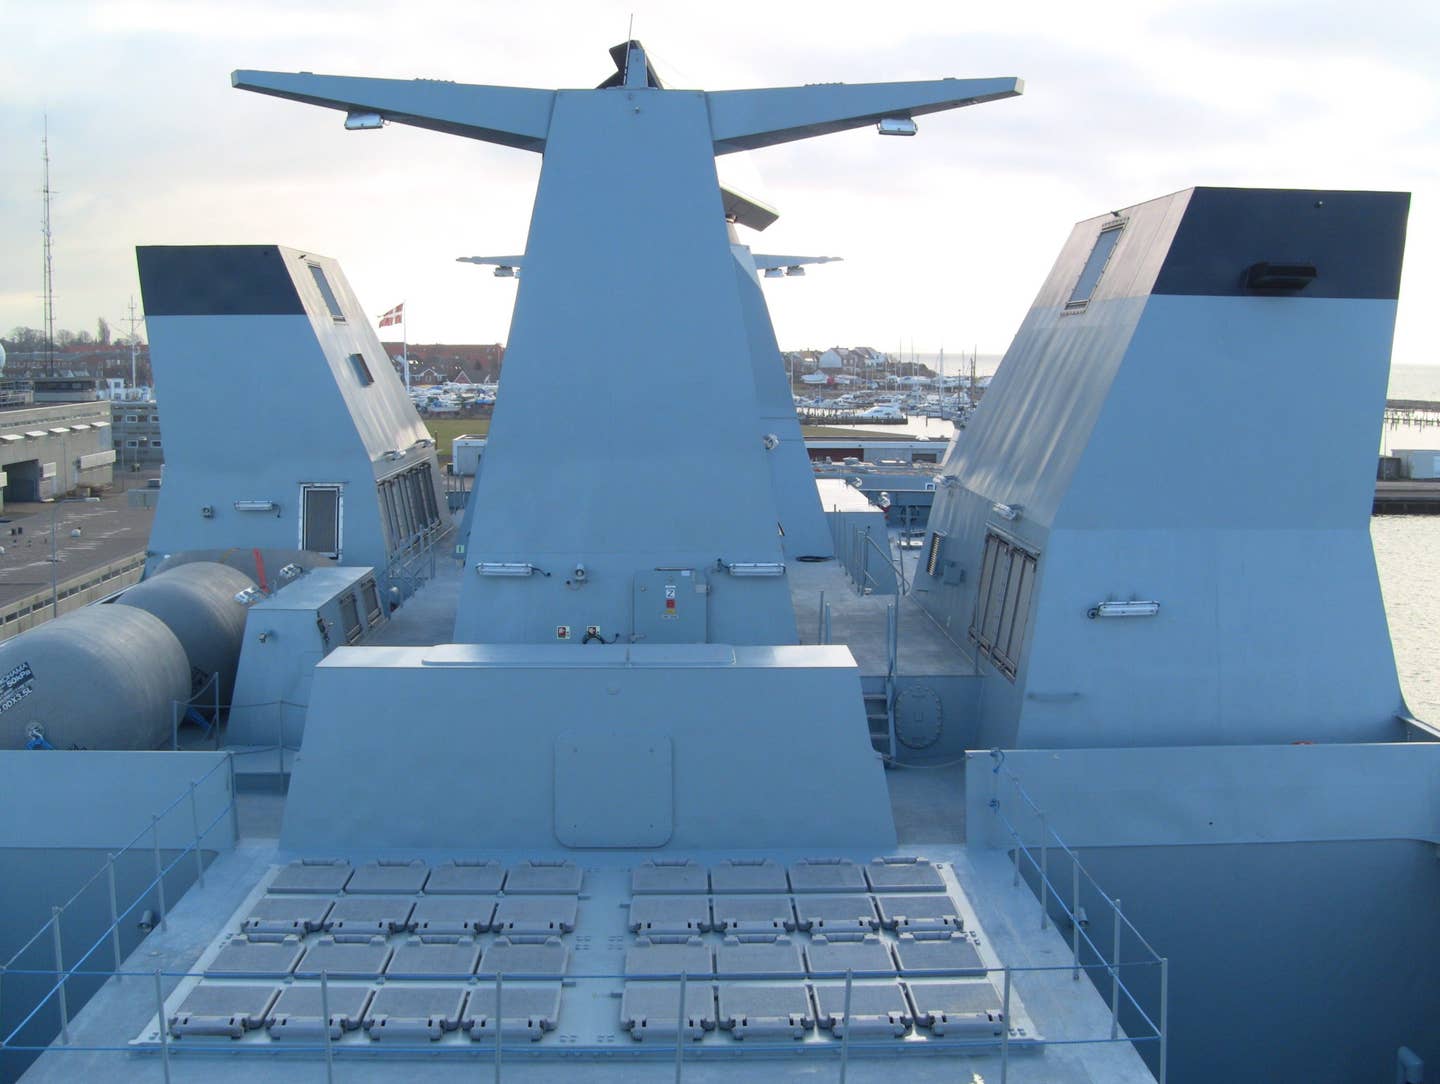 A look at the Mk 41 VLS for the SM-2 missiles carried by HDMS Iver Huitfeldt. (Wikimedia Commons)